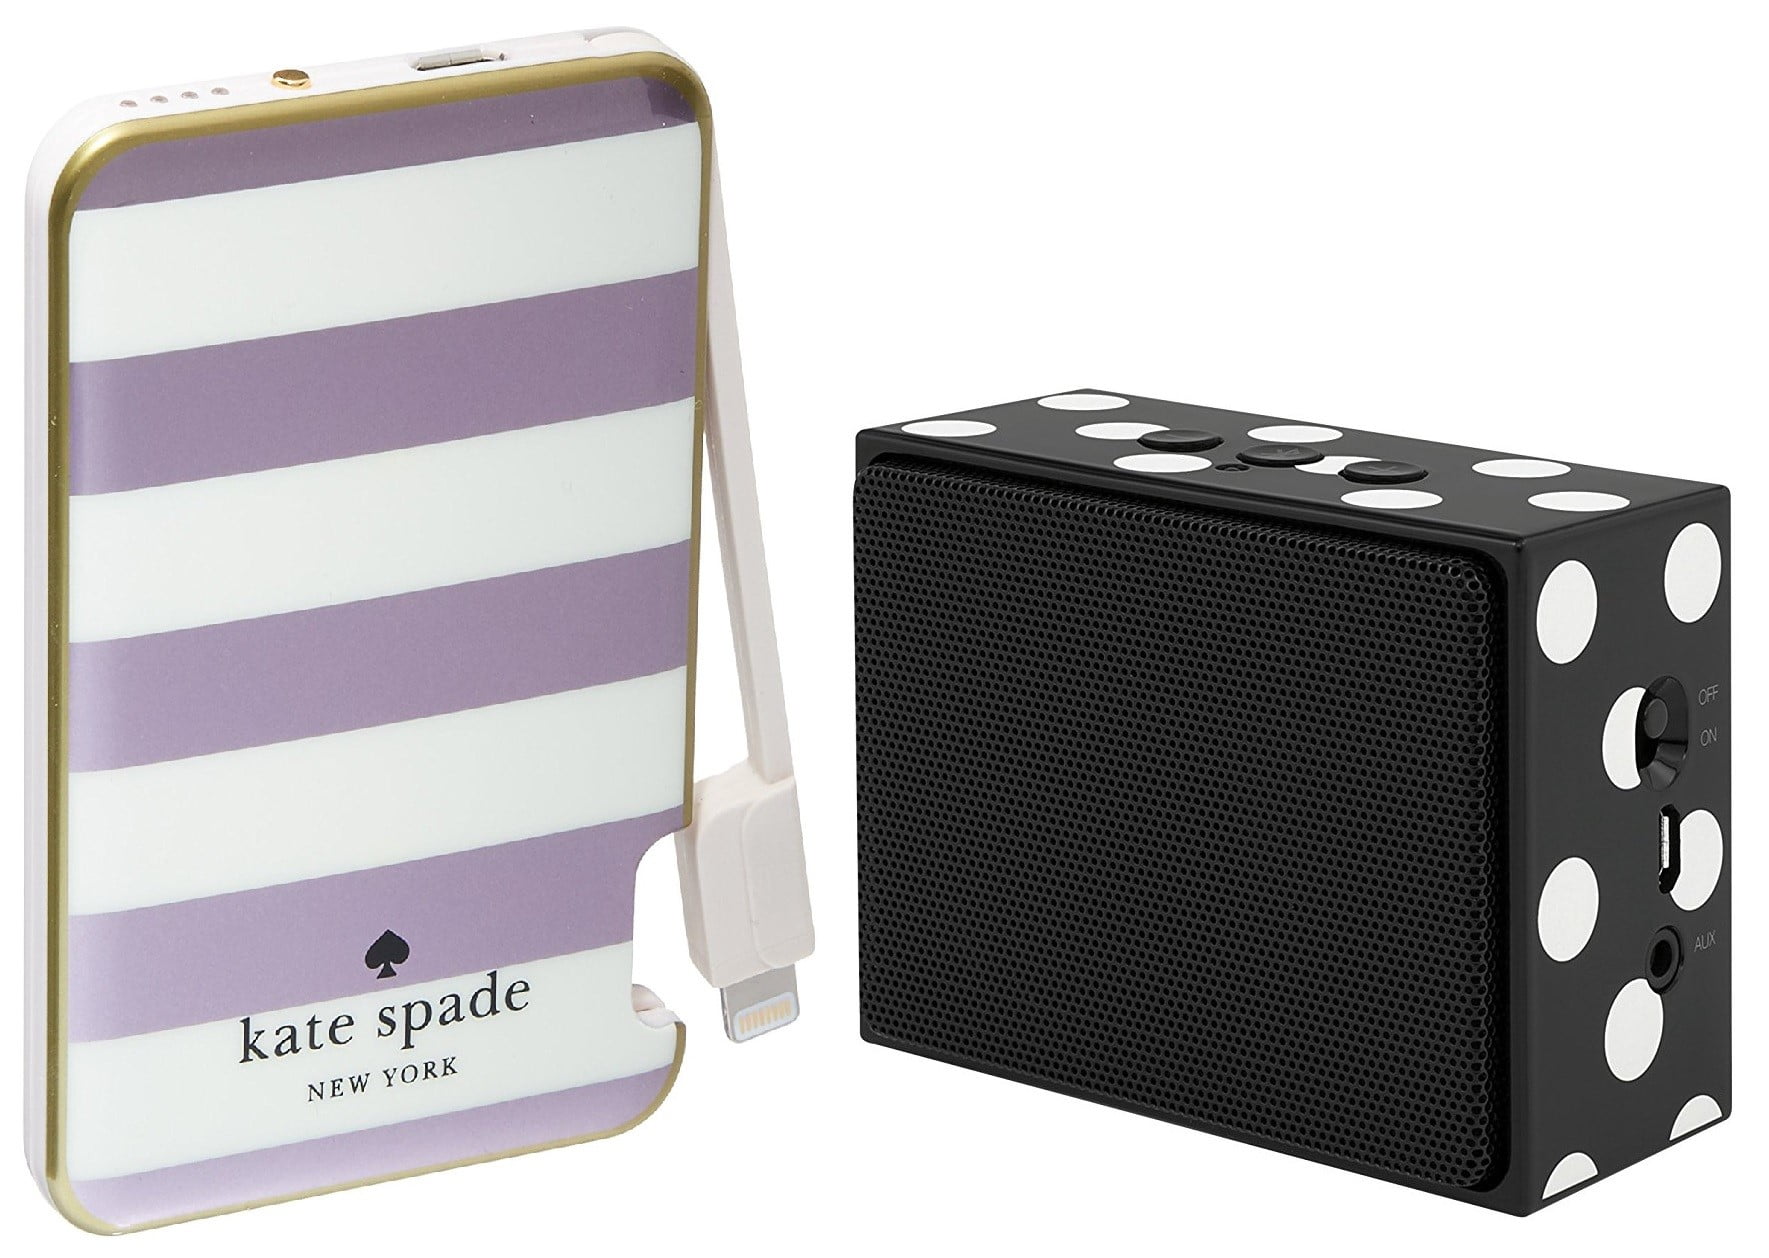 Kate Spade New York Combo Power Bank/Battery Charger with Lightning Cable  1500 mAh & Portable Wireless Bluetooth Speaker 